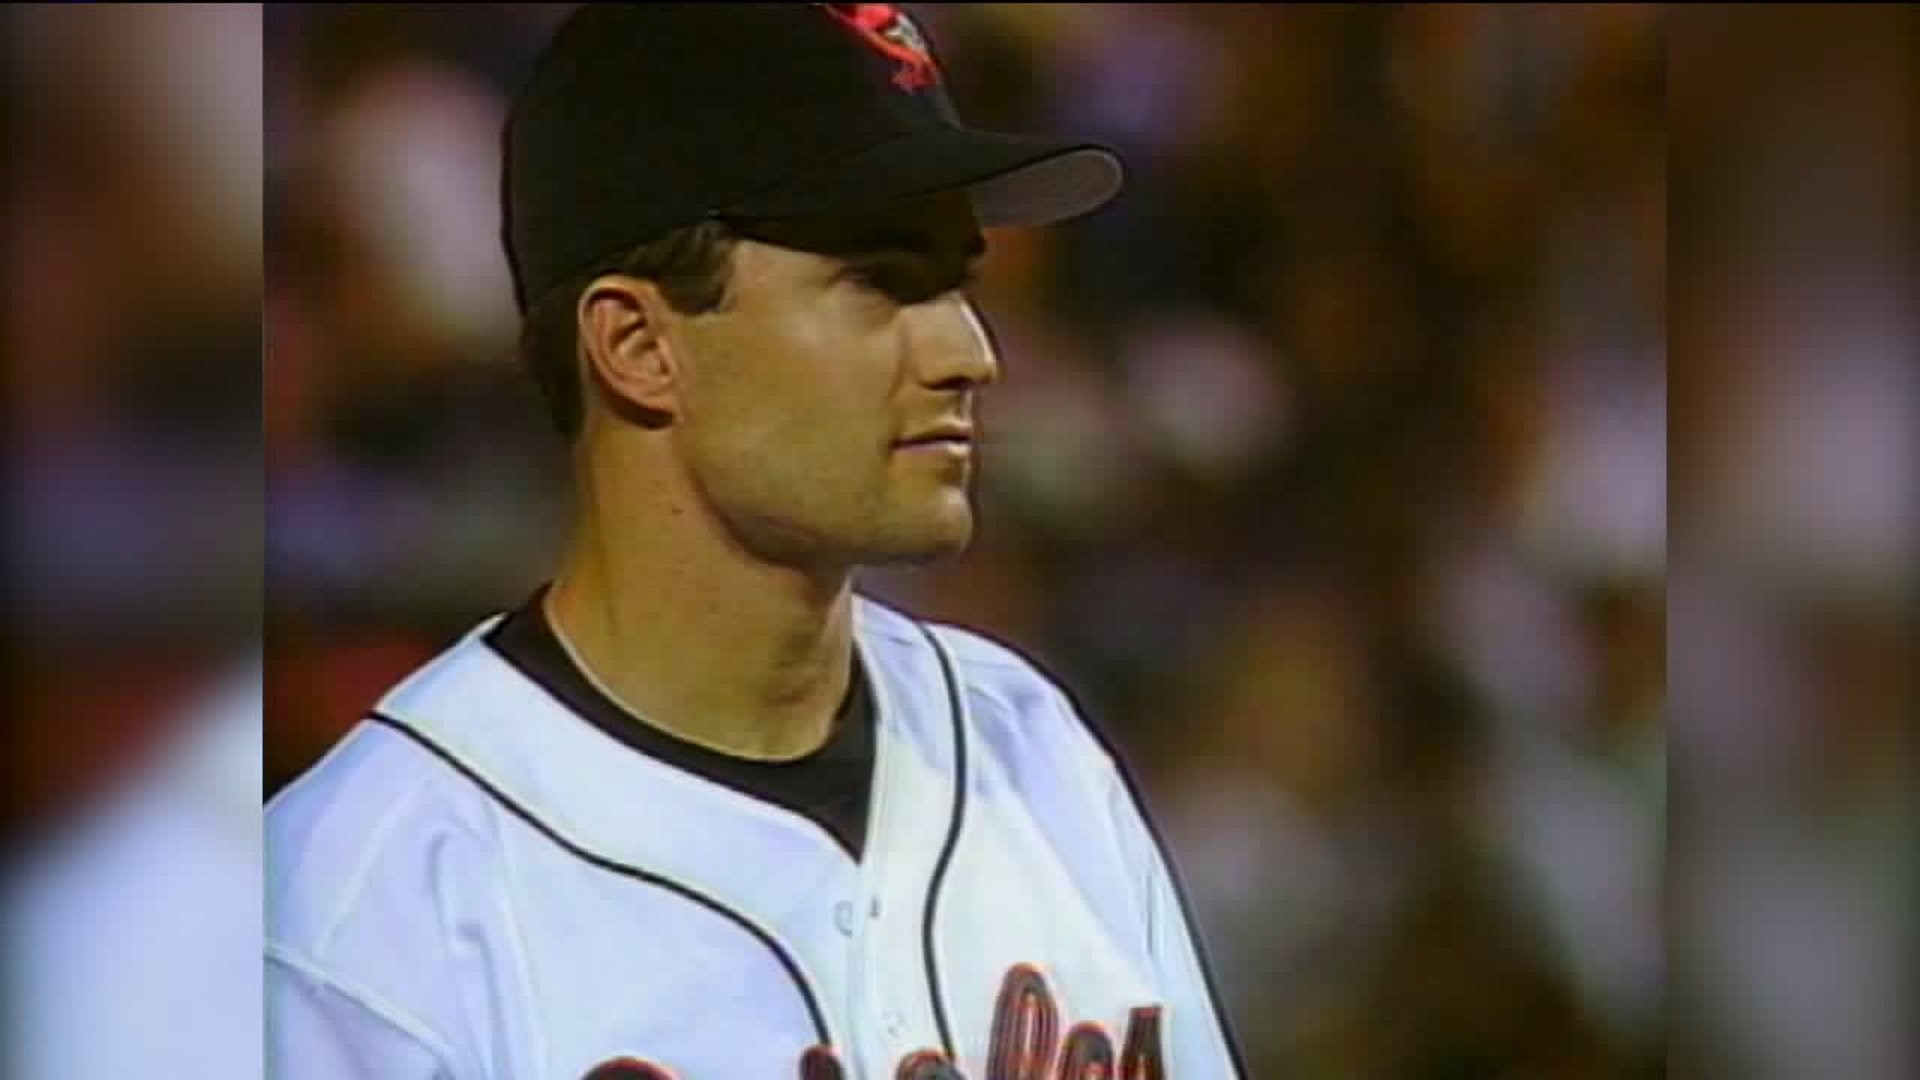 Hall-of-Fame wait may end Tuesday for ex-Orioles All-Star Mike Mussina